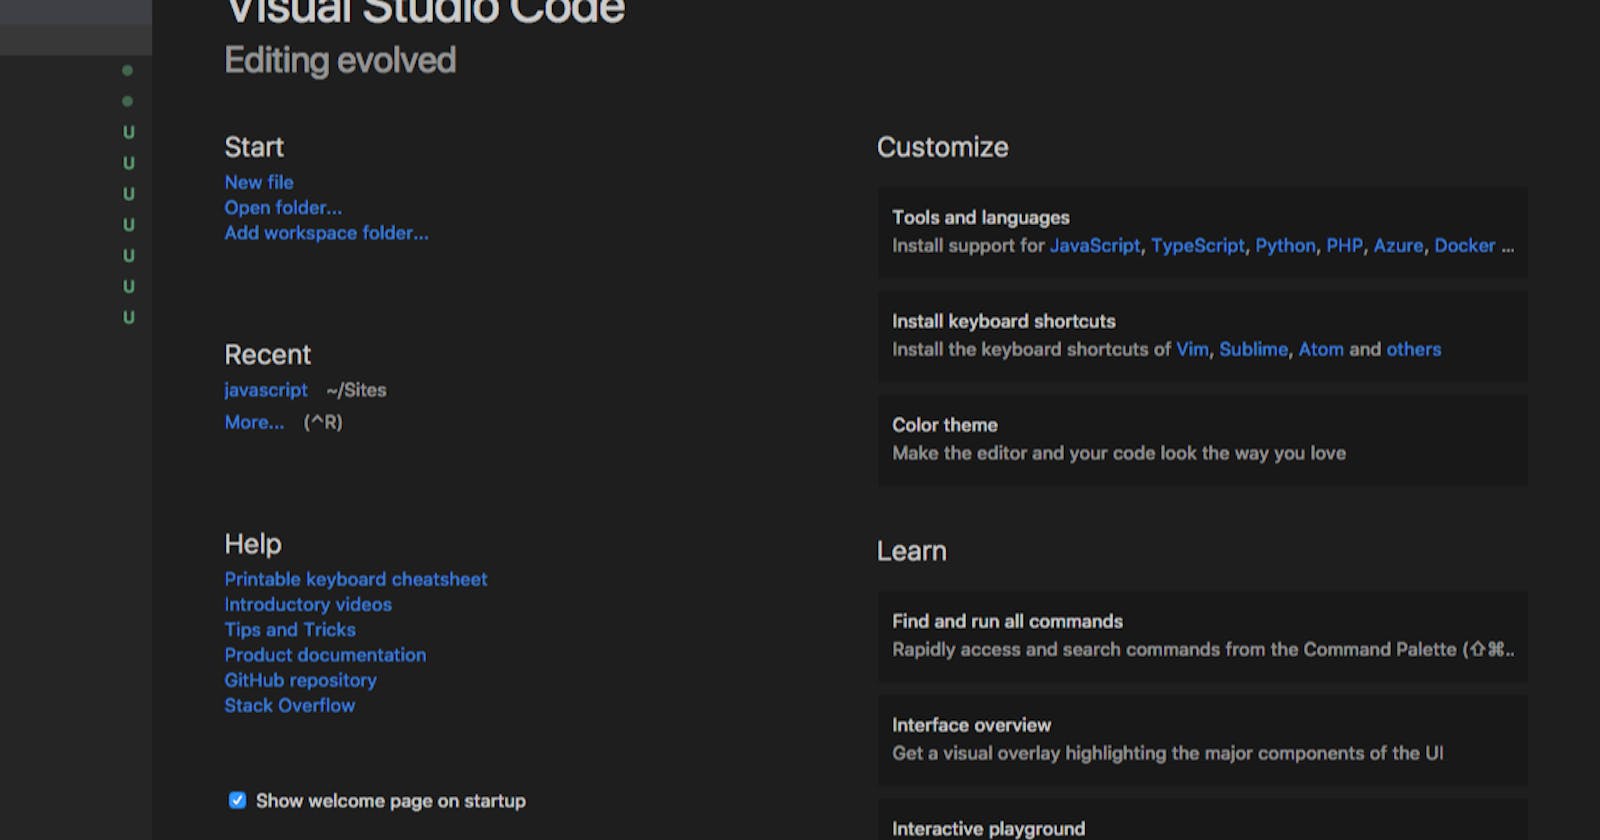 What do you like most about Visual Studio Code compared to other Editors you have used